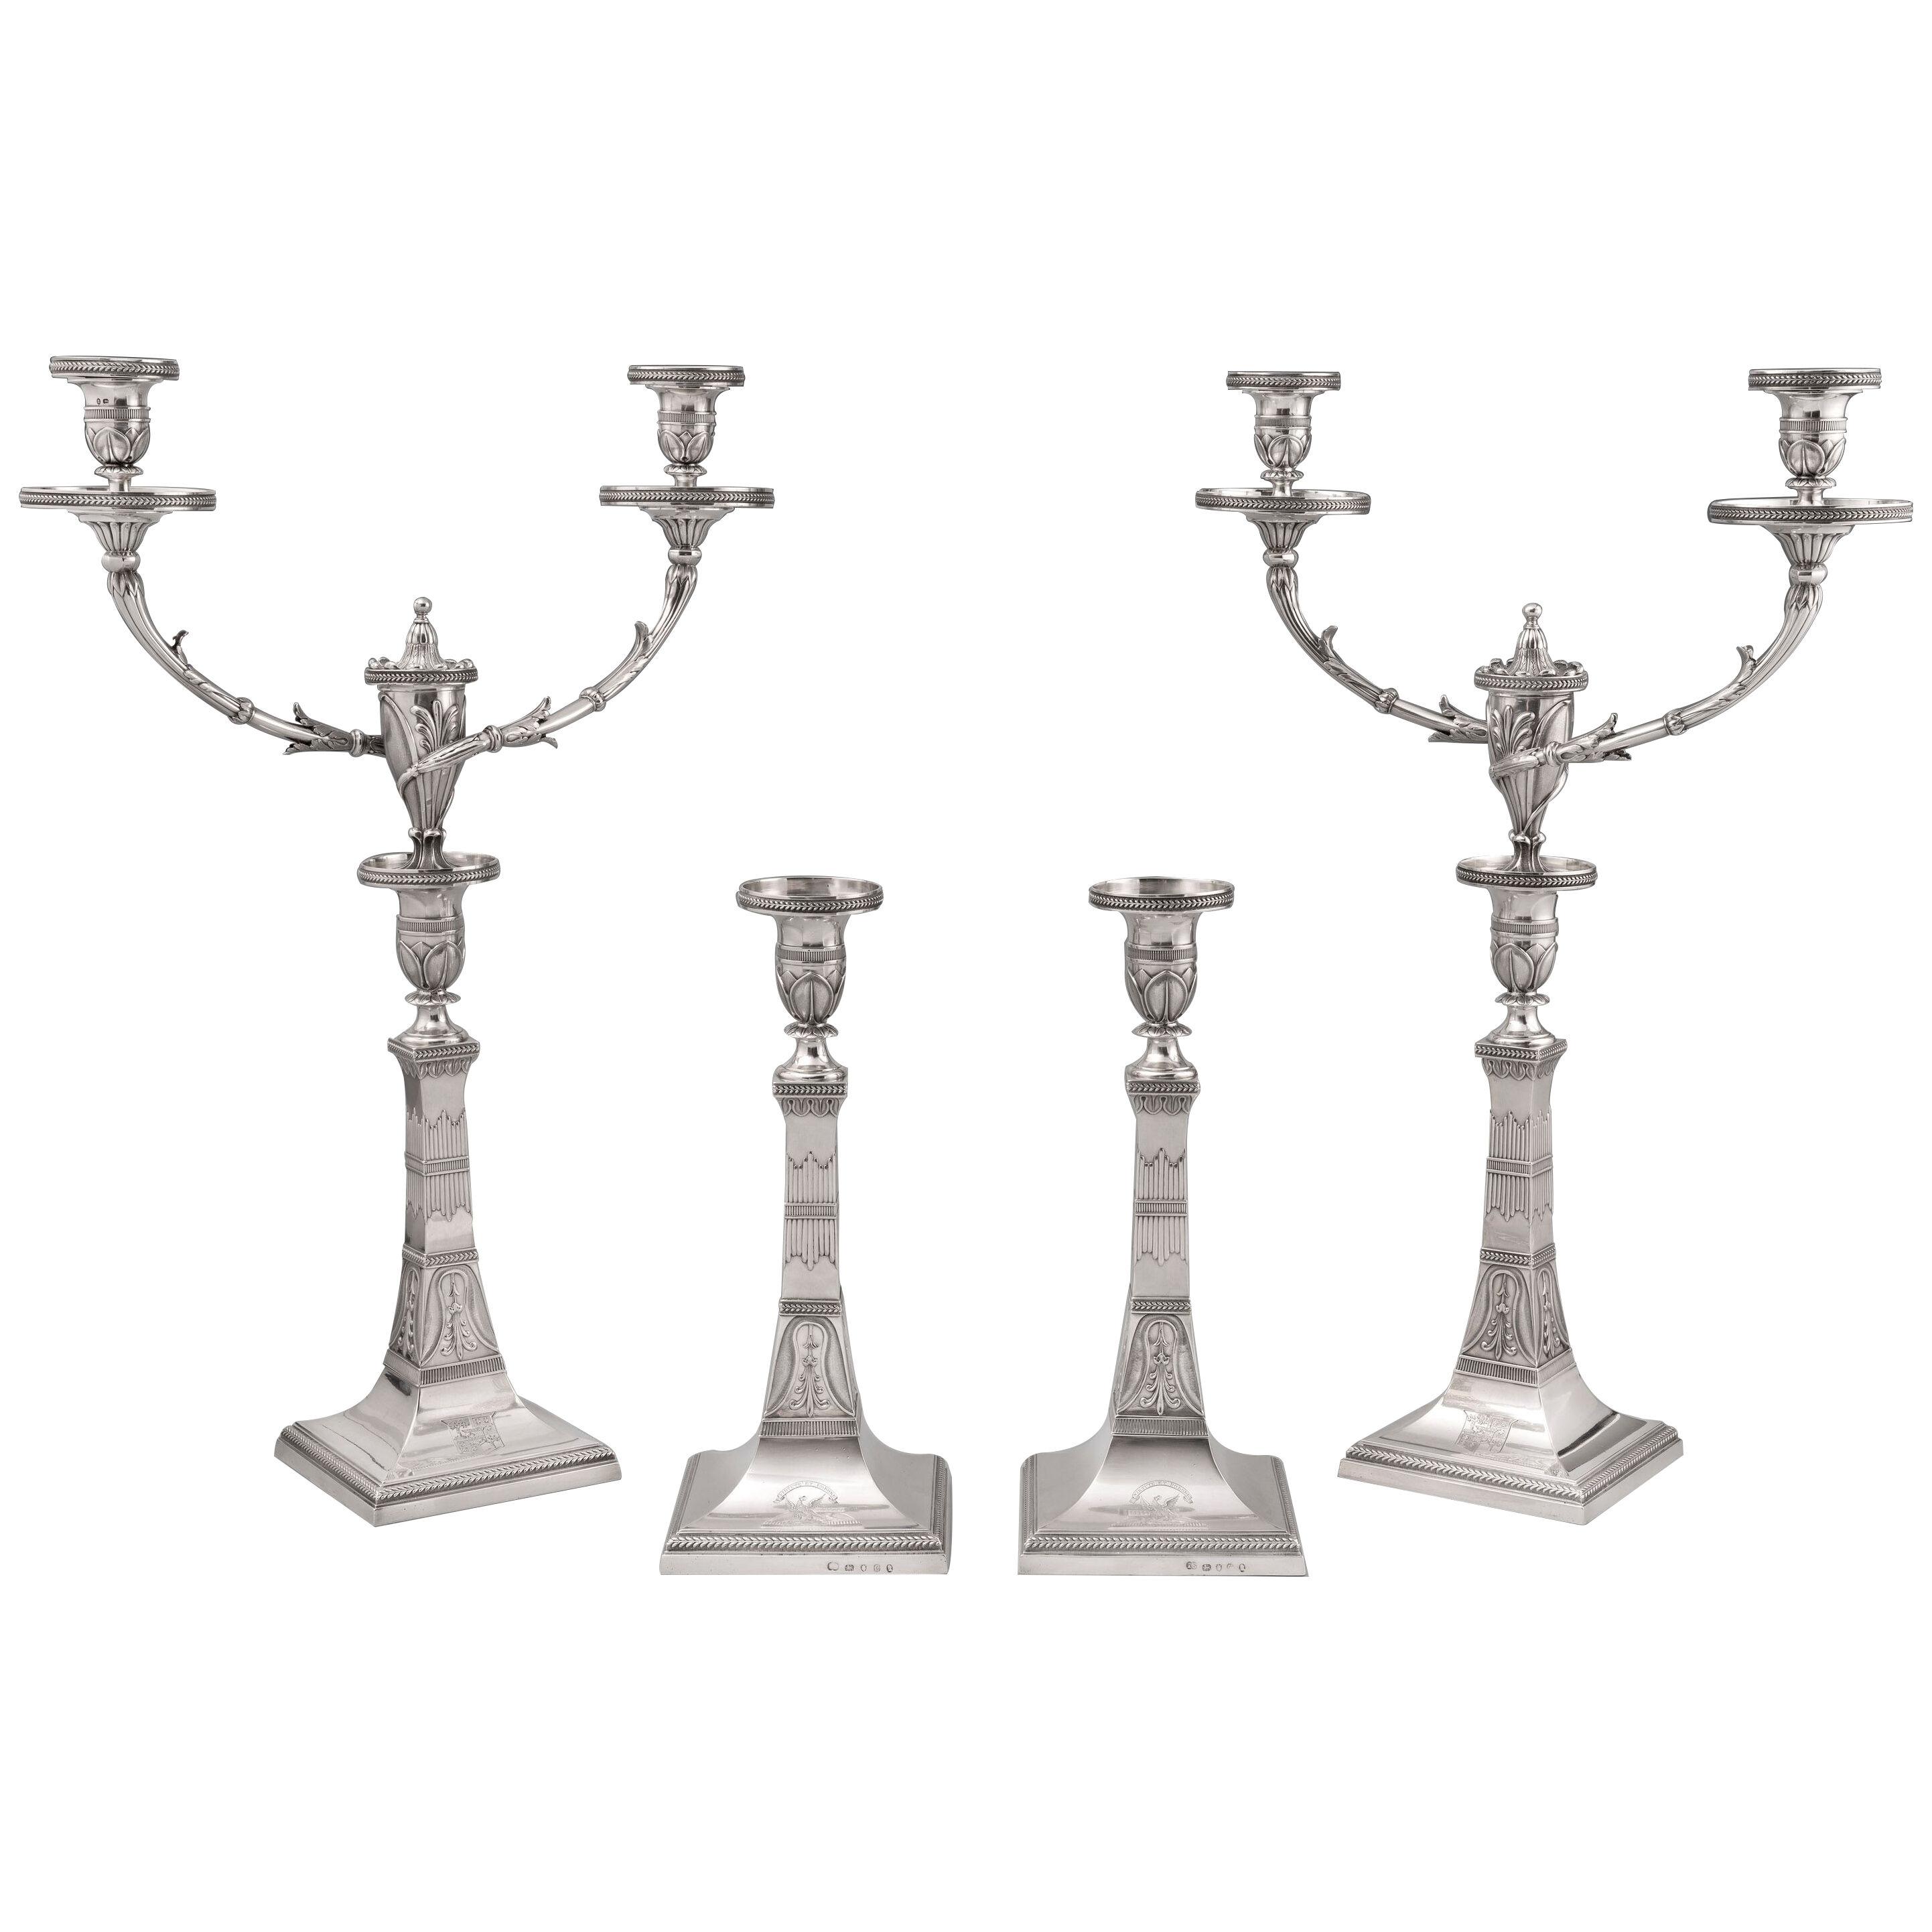 An Exceptionally Rare Candelabra Suite in the Egyptian Style